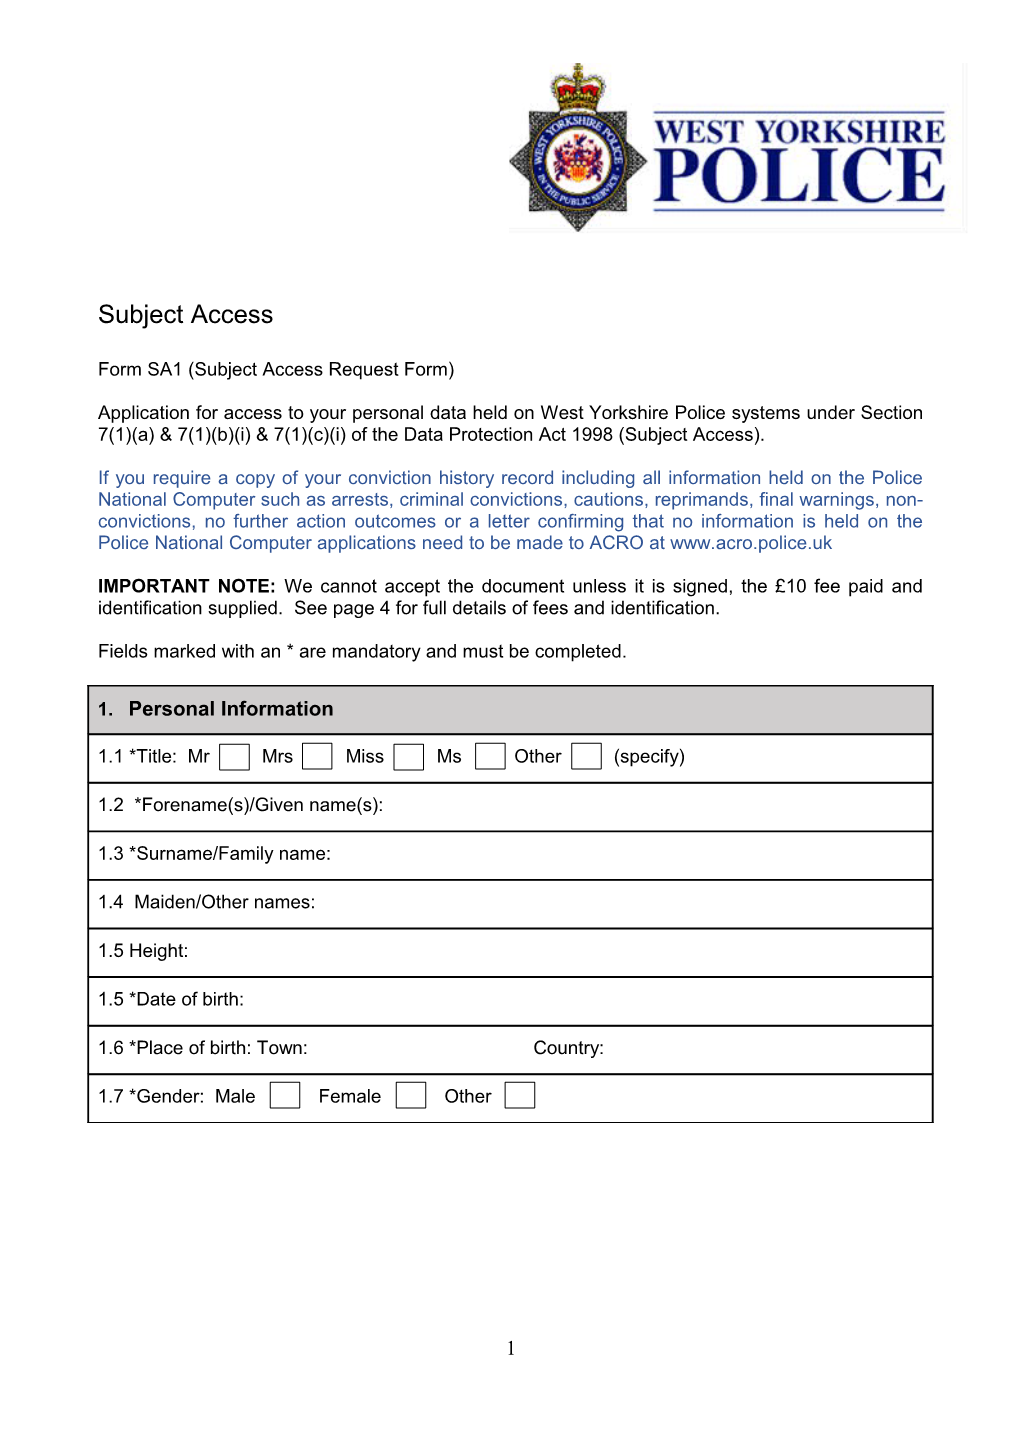 Form SA1 (Subject Access Request Form)